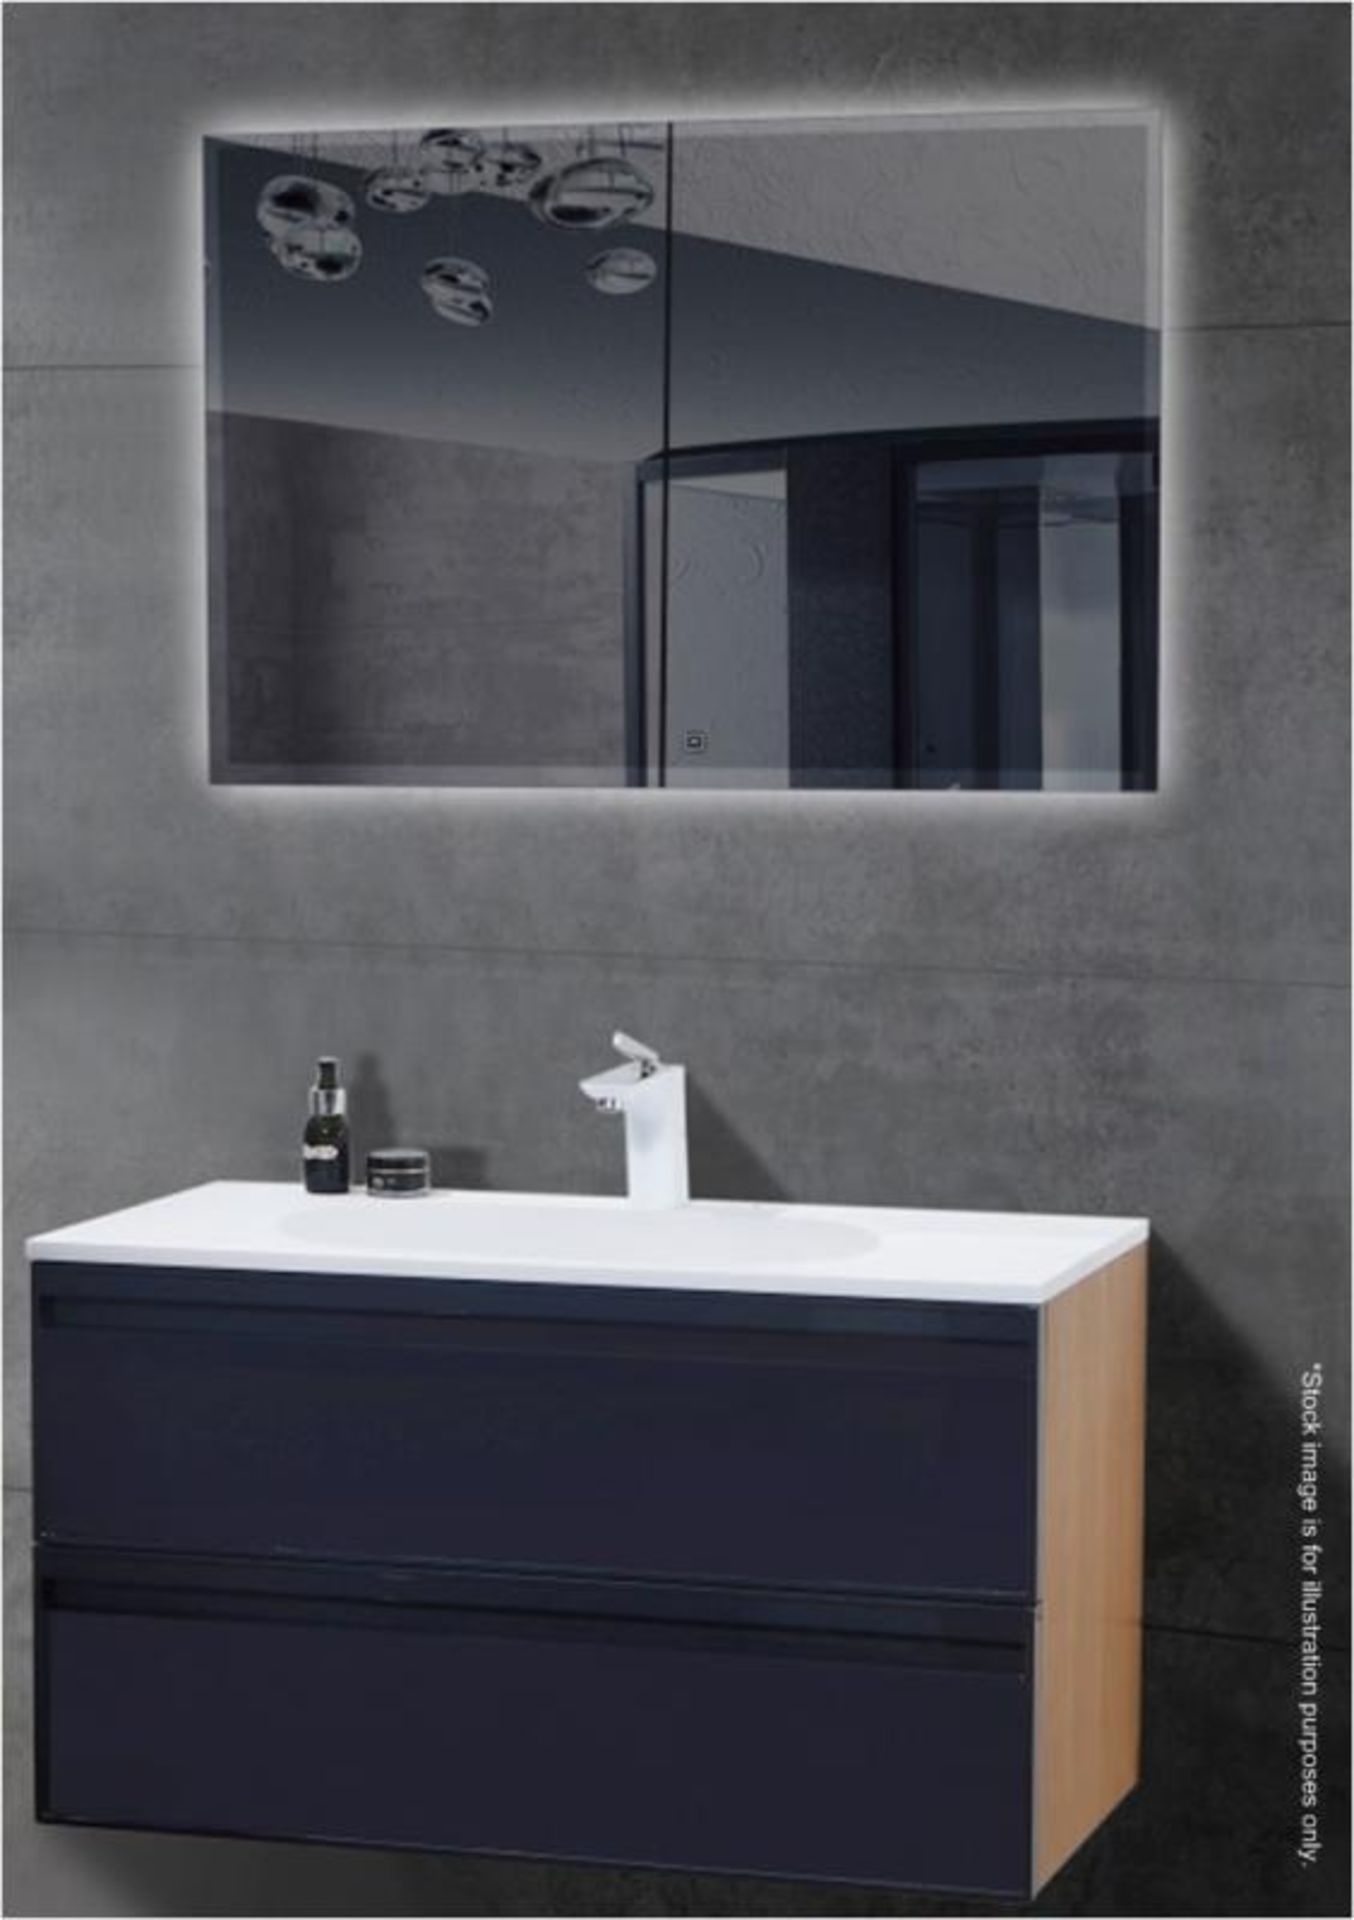 1 x Quartz Stone Topped Wall Hung Bathroom Vanity Unit With A Stone Resin Basin And Soft Close Drawe